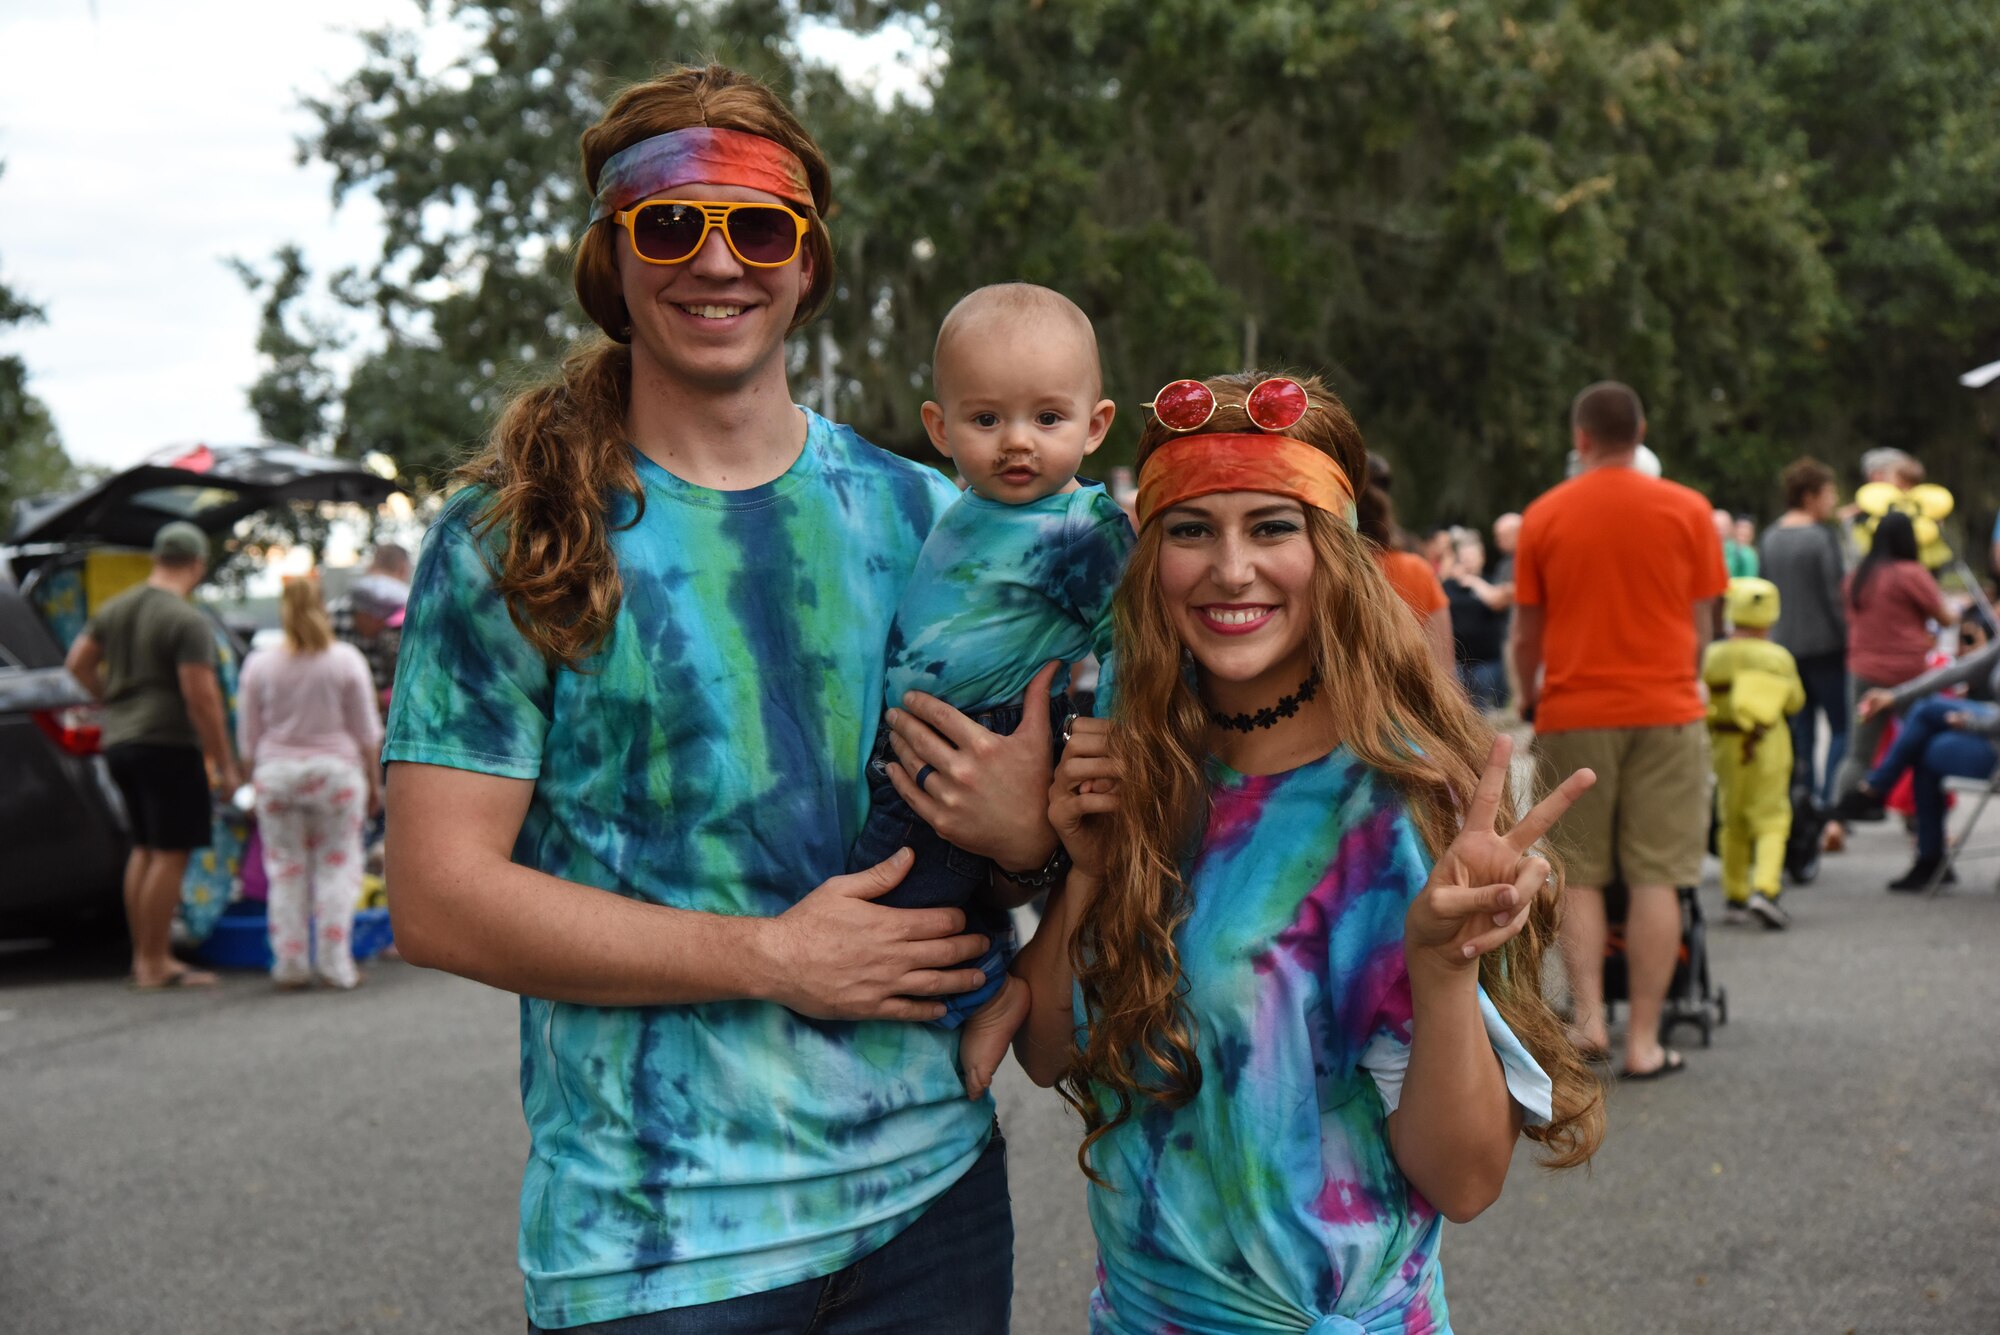 Staff Sgt. David Turner III, 81st Security Forces Squadron unit trainer, Heather Turner, 81st Force Support Squadron marketing assistant, and their son, Peyton, pose for a photo during Ghouls in the Park at Marina Park Oct. 27, 2017, on Keesler Air Force Base, Mississippi. Ghouls in the Park also featured an alien bus, a haunted house, “Trunk or Treat” and games for children of all ages. (U.S. Air Force photo by Kemberly Groue)